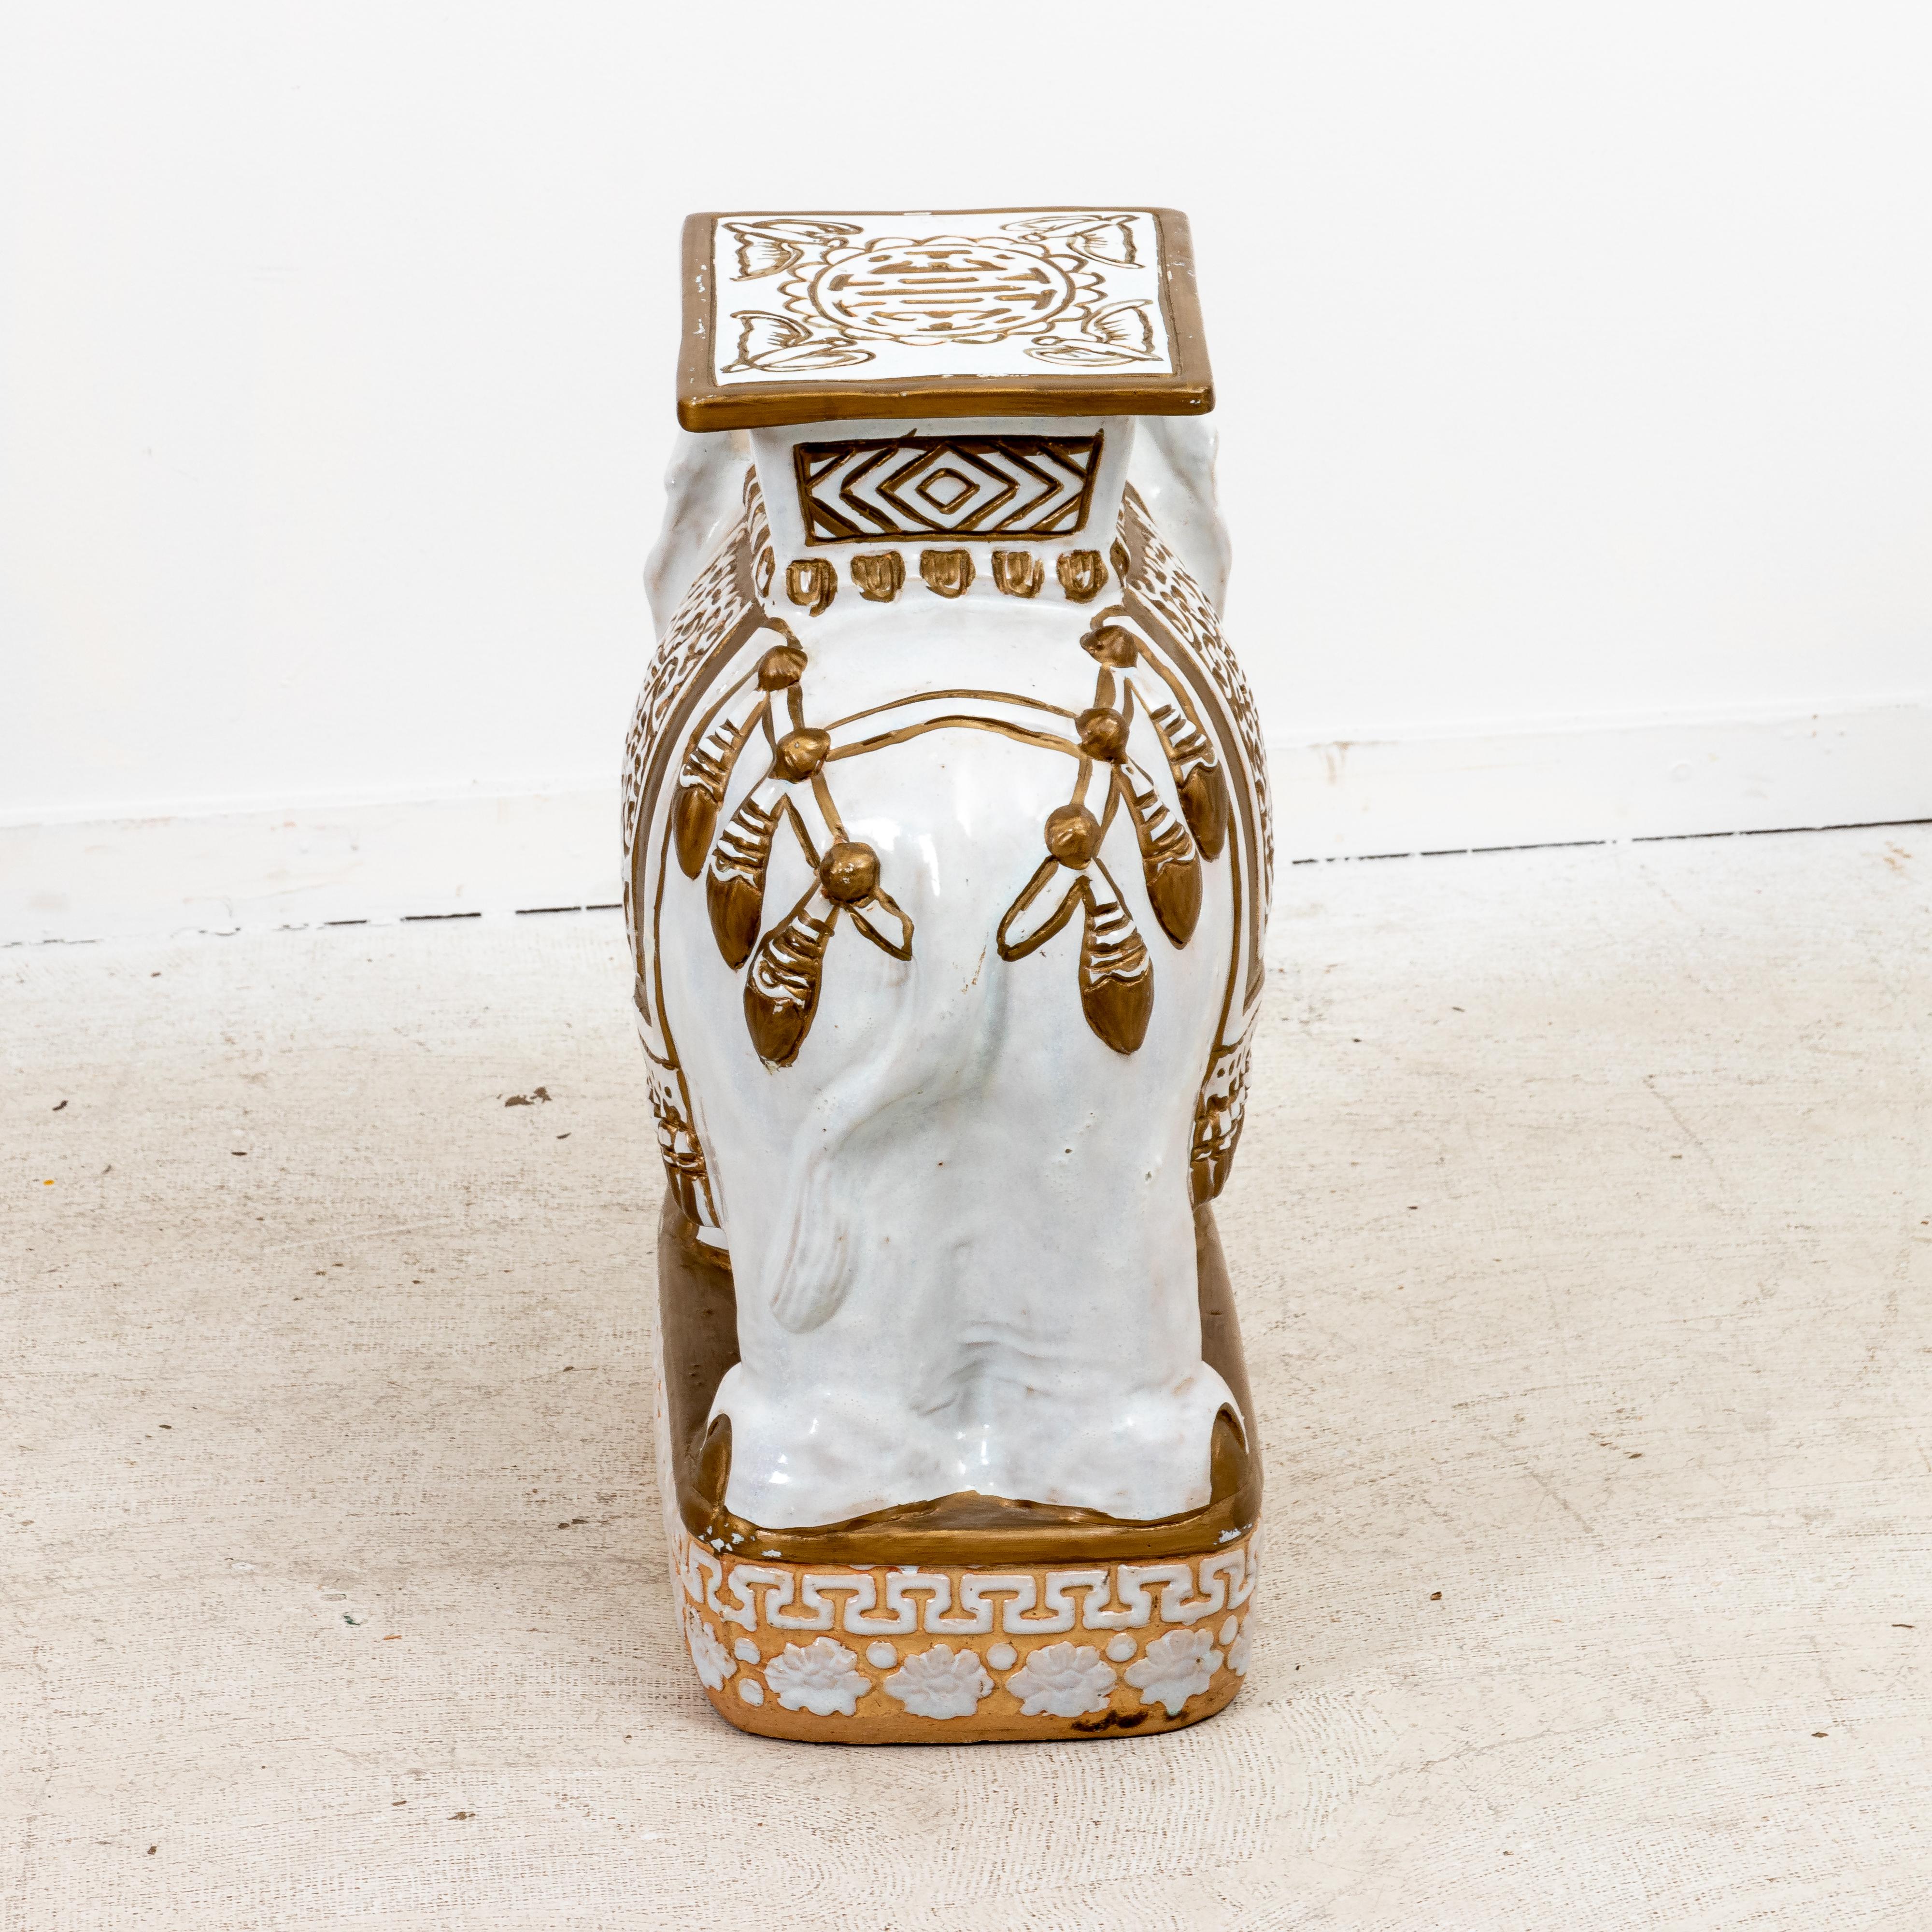 Hand-Painted White and Gold Ceramic Elephant Garden Seat